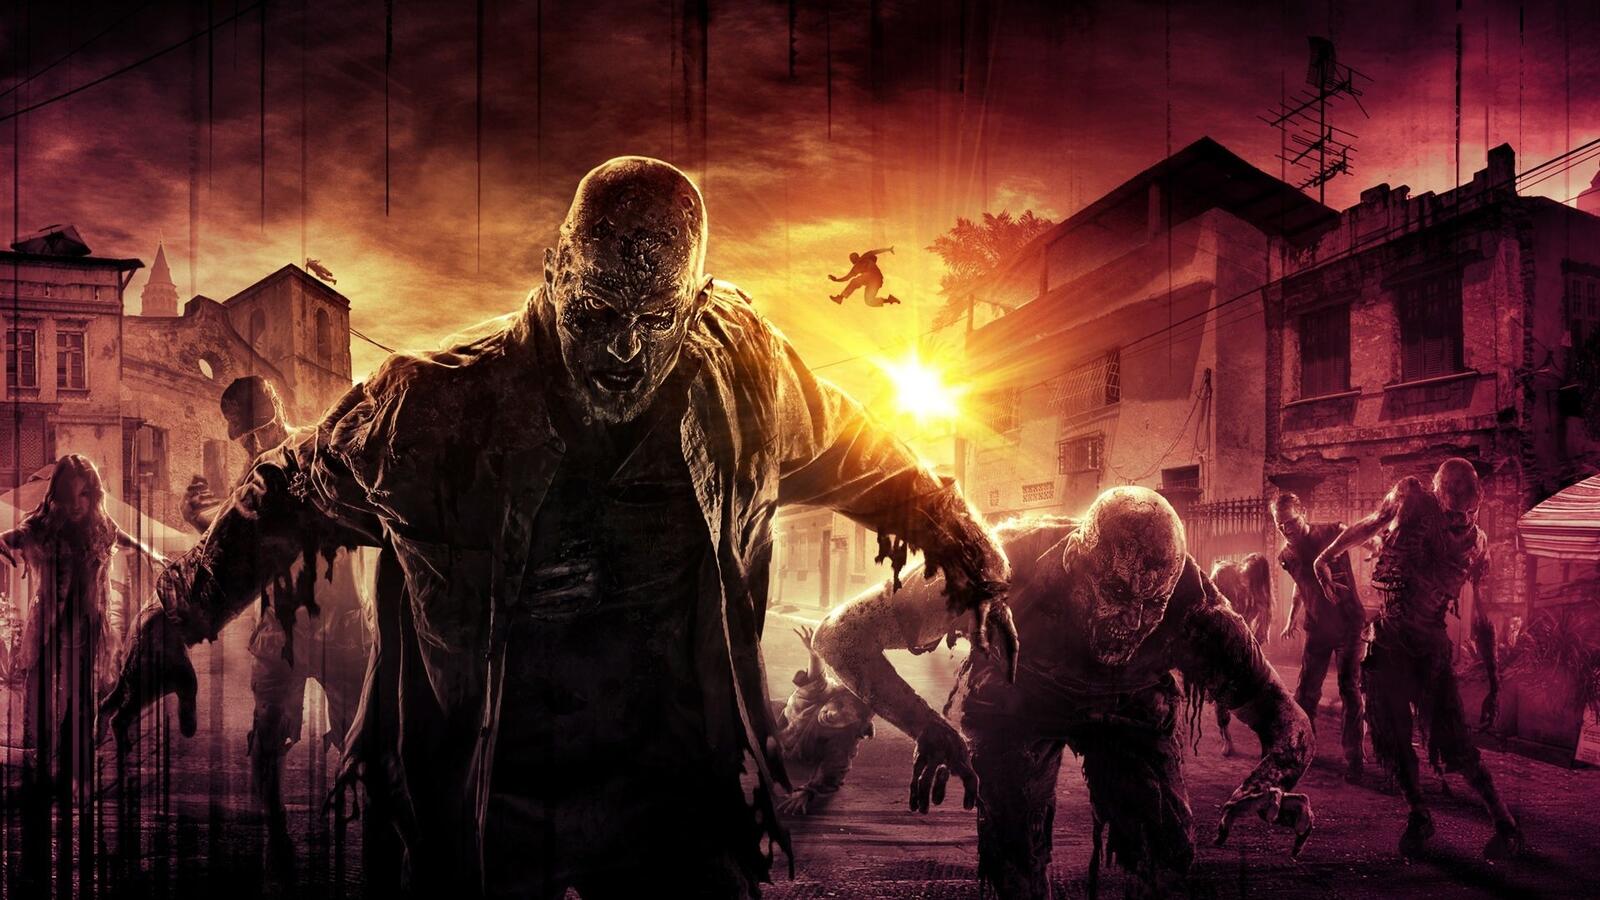 Wallpapers zombies sunset wallpaper dying light on the desktop